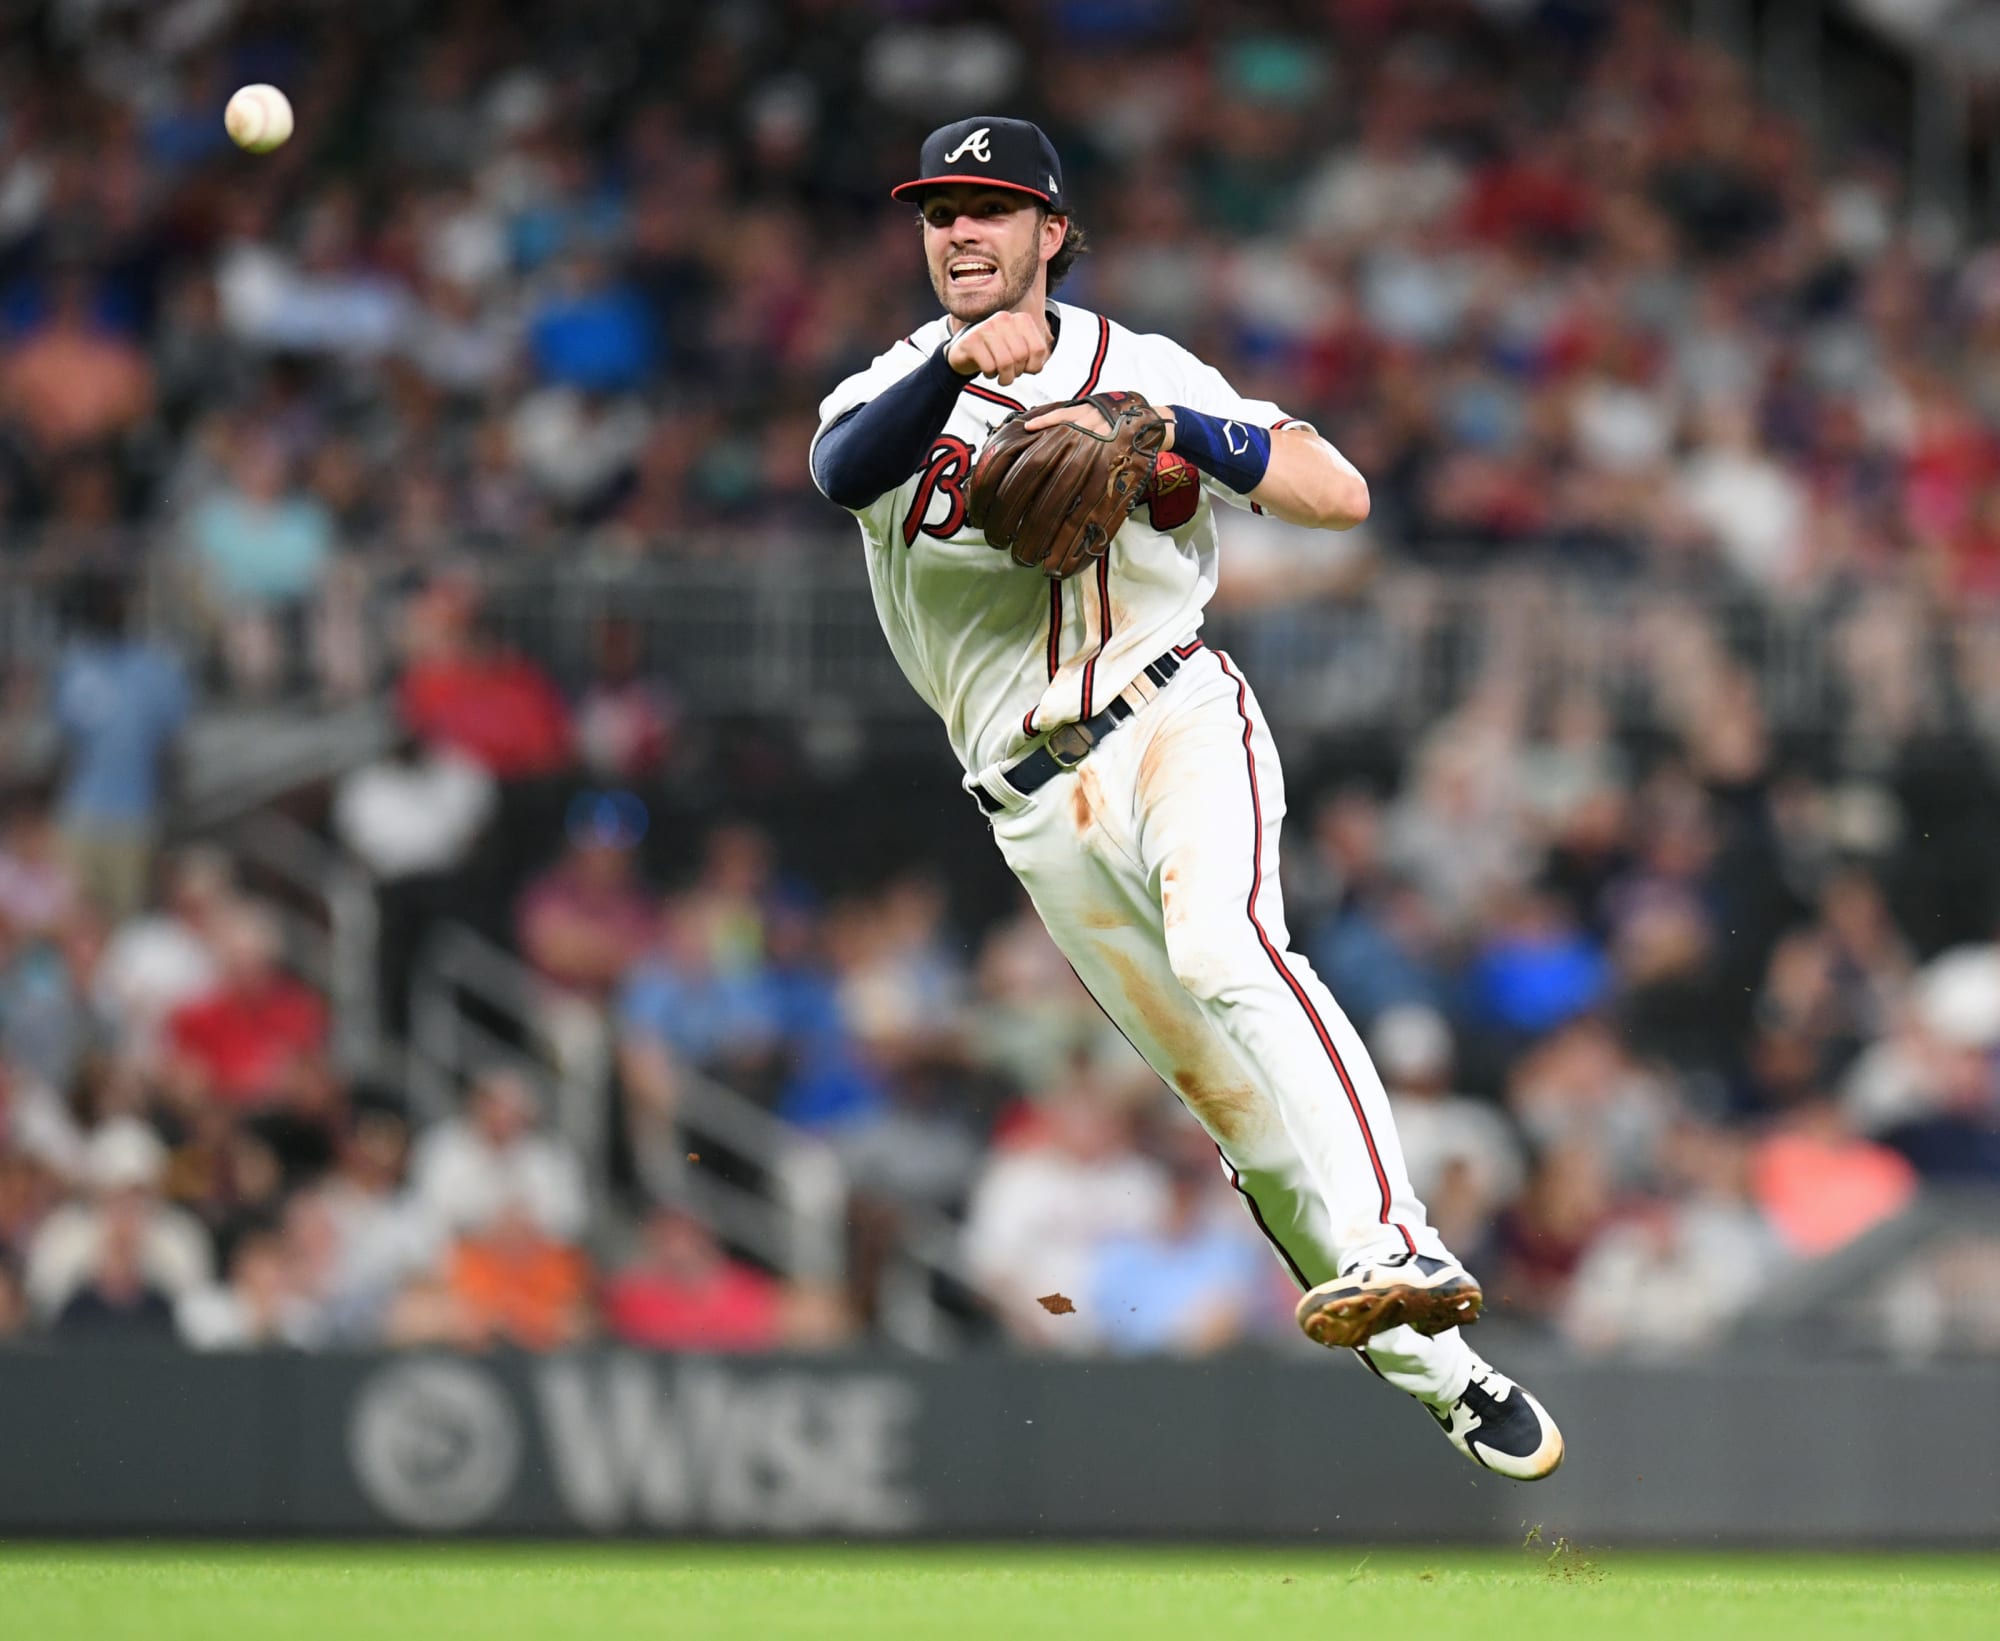 Atlanta Braves Dansby Swanson is a great shortstop and will get better